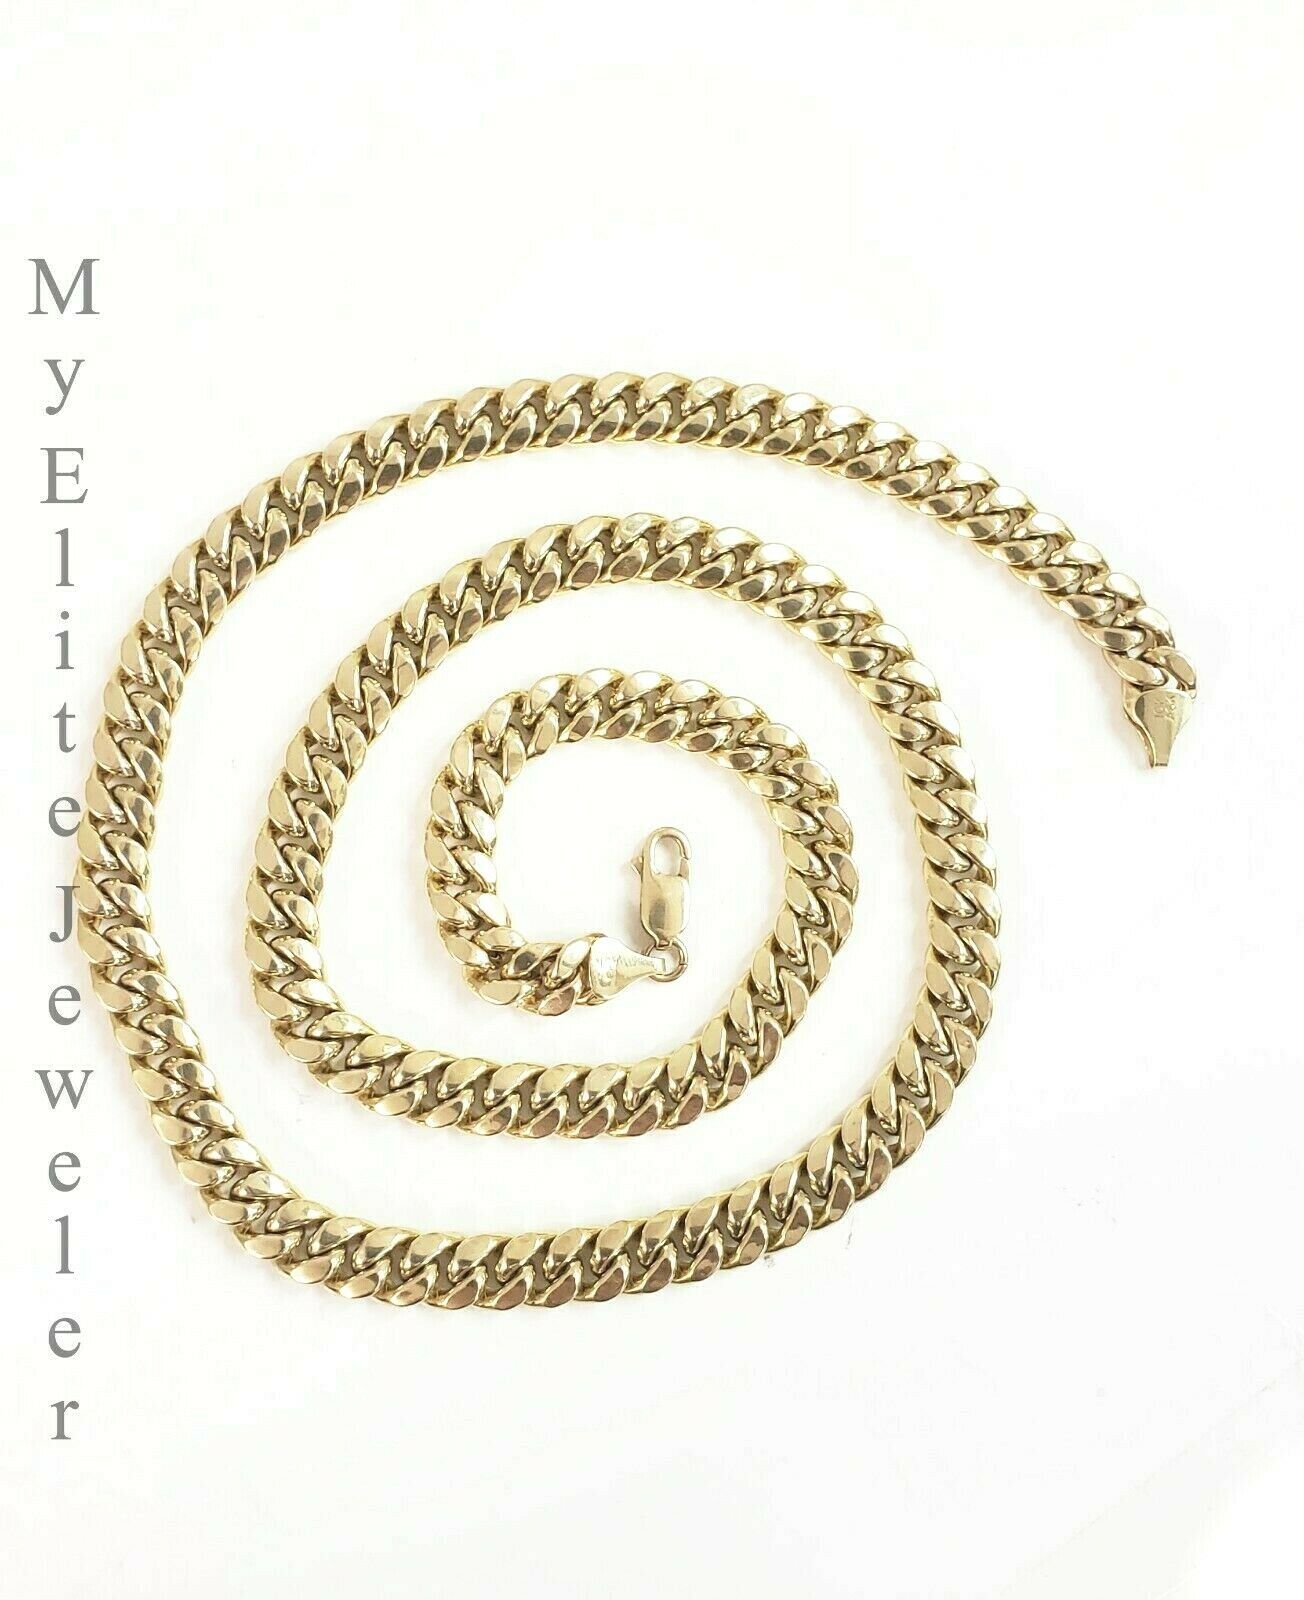 Real 10K Yellow Gold Cuban Link Chain Necklace 24